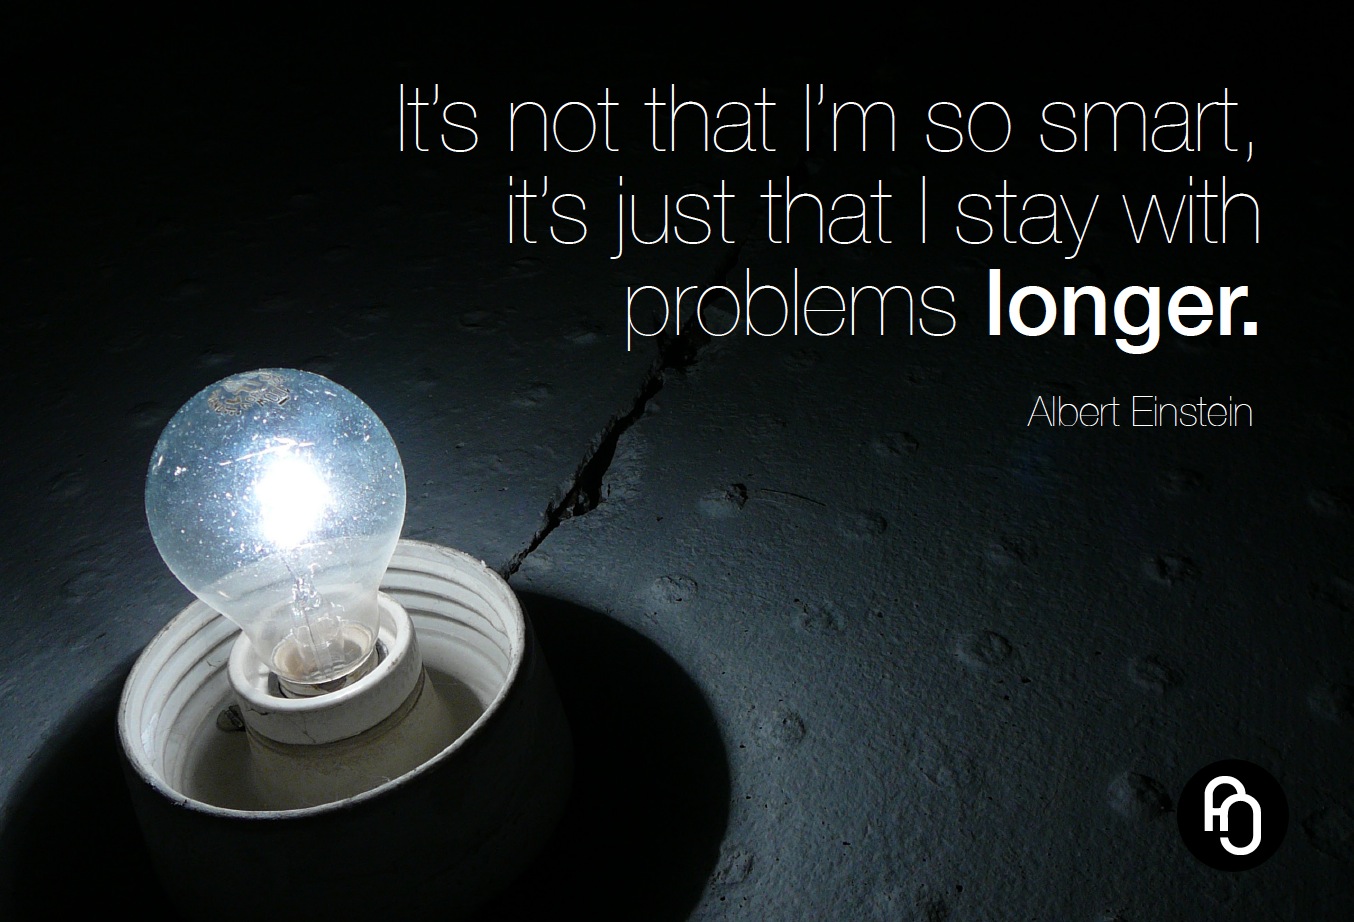 http://focusnjoy.com/wp/wp-content/uploads/2012/08/Its-not-that-Im-so-smart-its-just-that-I-stay-with-problems-longer.jpg